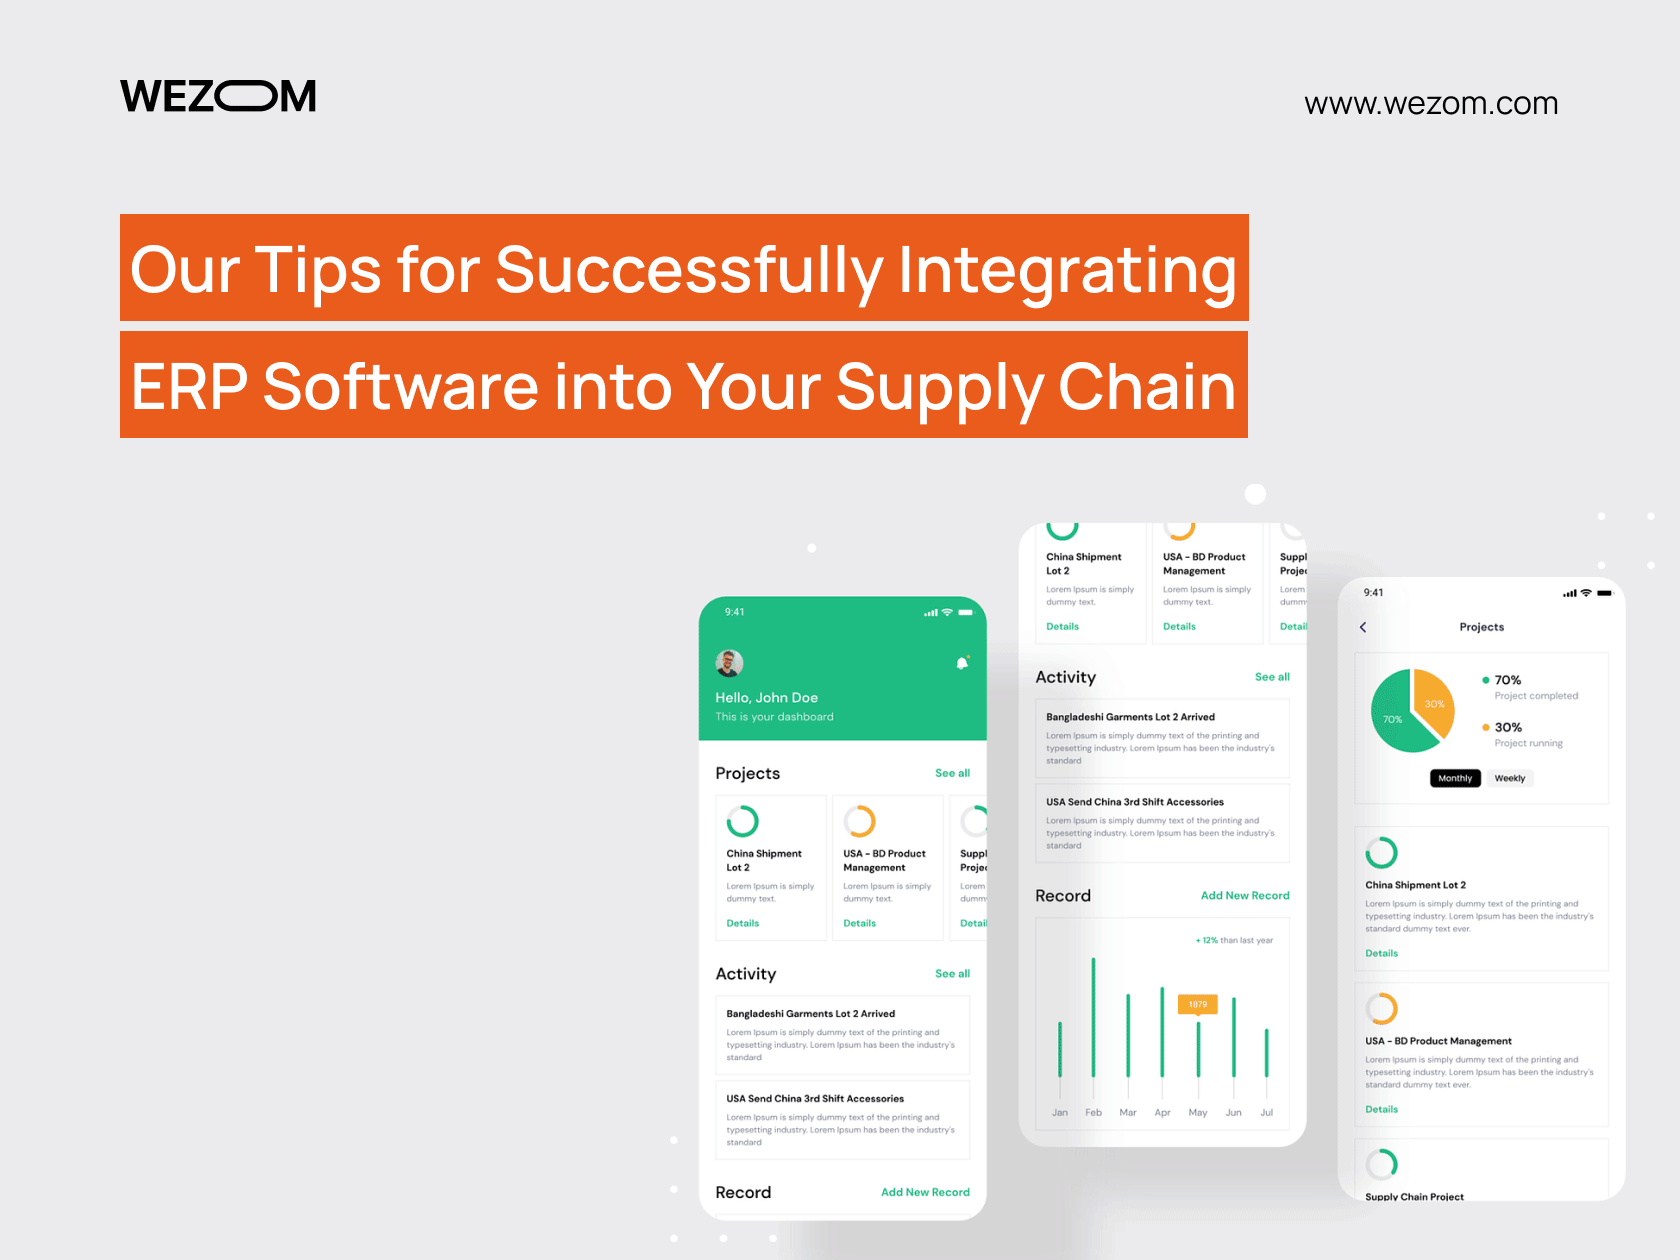 Our Tips for Successfully Integrating ERP Software into Your Supply Chain